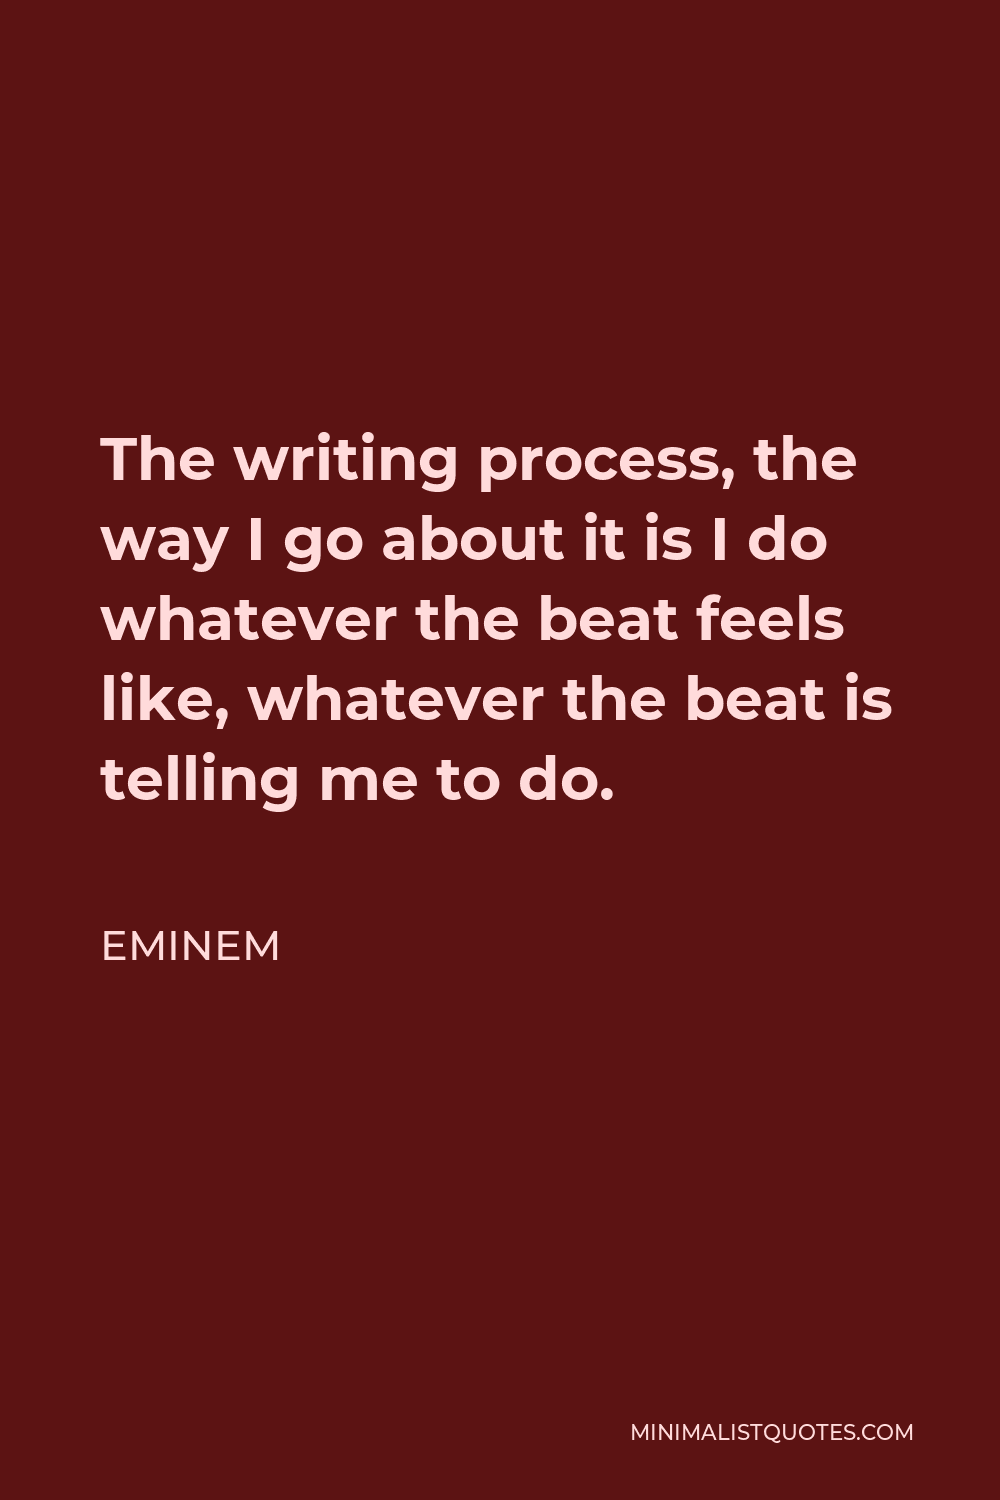 Eminem Quote - The writing process, the way I go about it is I do whatever the beat feels like, whatever the beat is telling me to do.